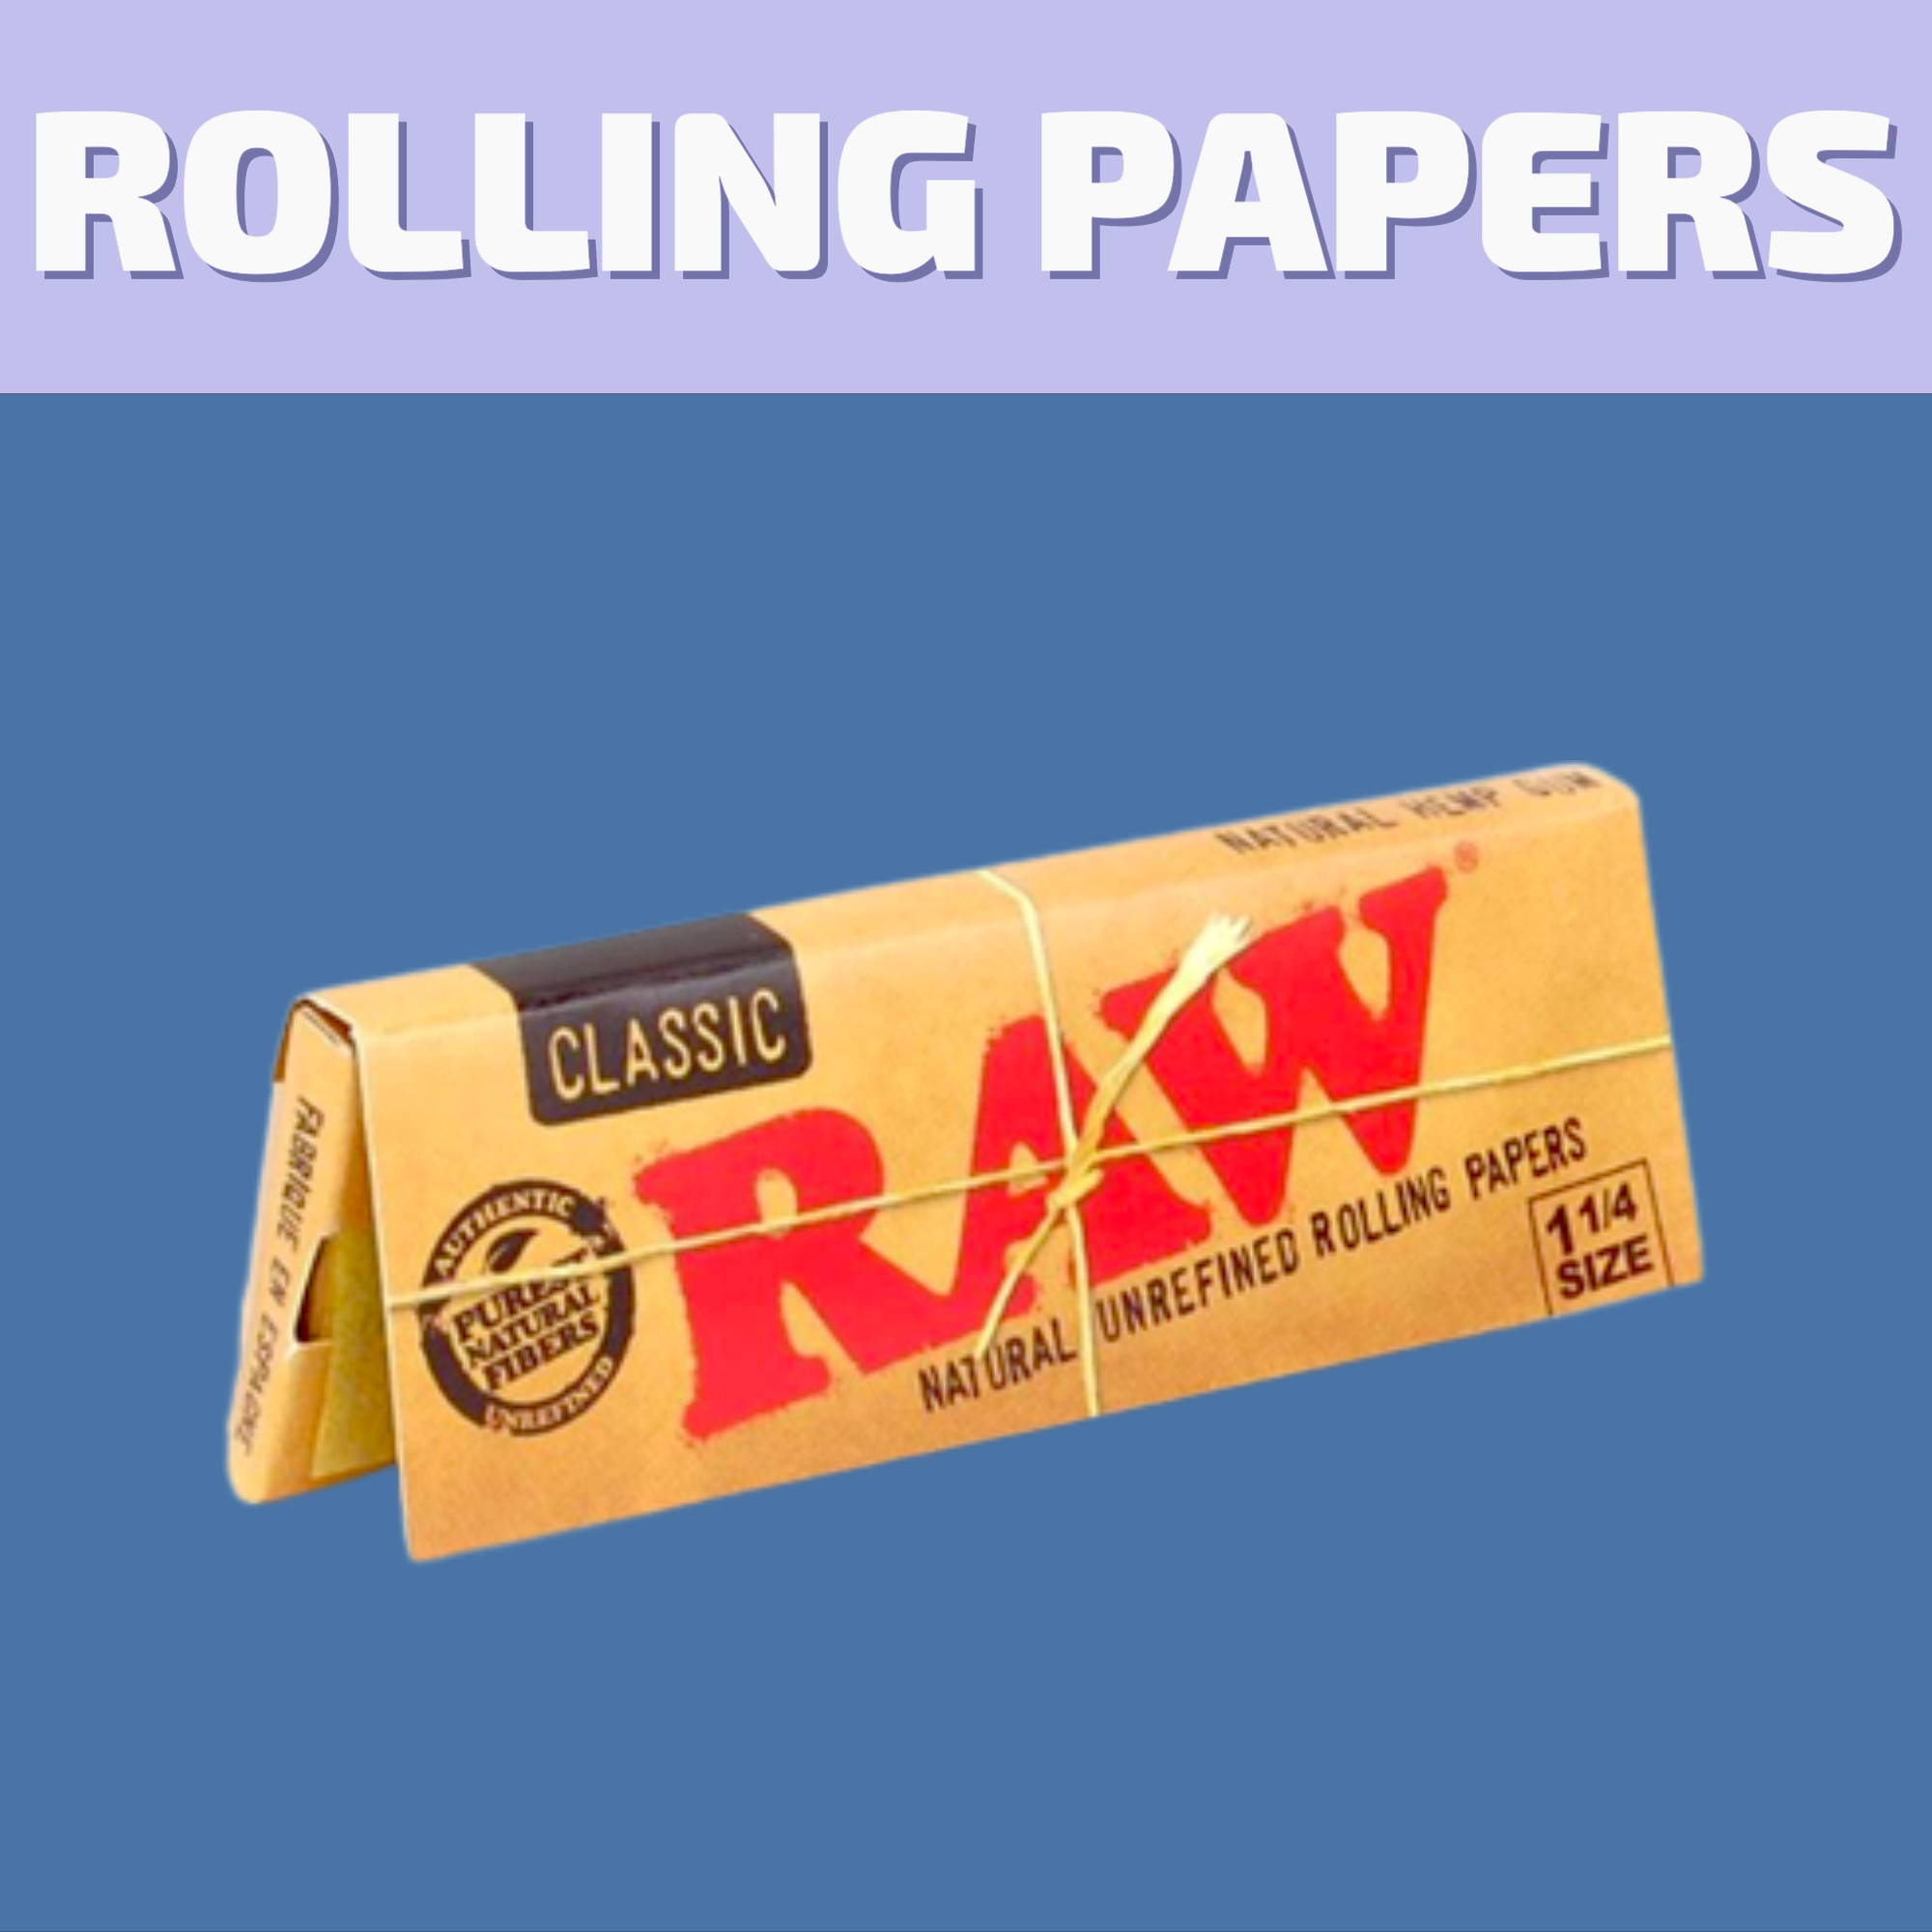 Shop our selection of Rolling Papers, Grinders, Hemp Wraps, and Filters for same day delivery in Winnipeg or visit our cannabis store on 580 Academy Road.